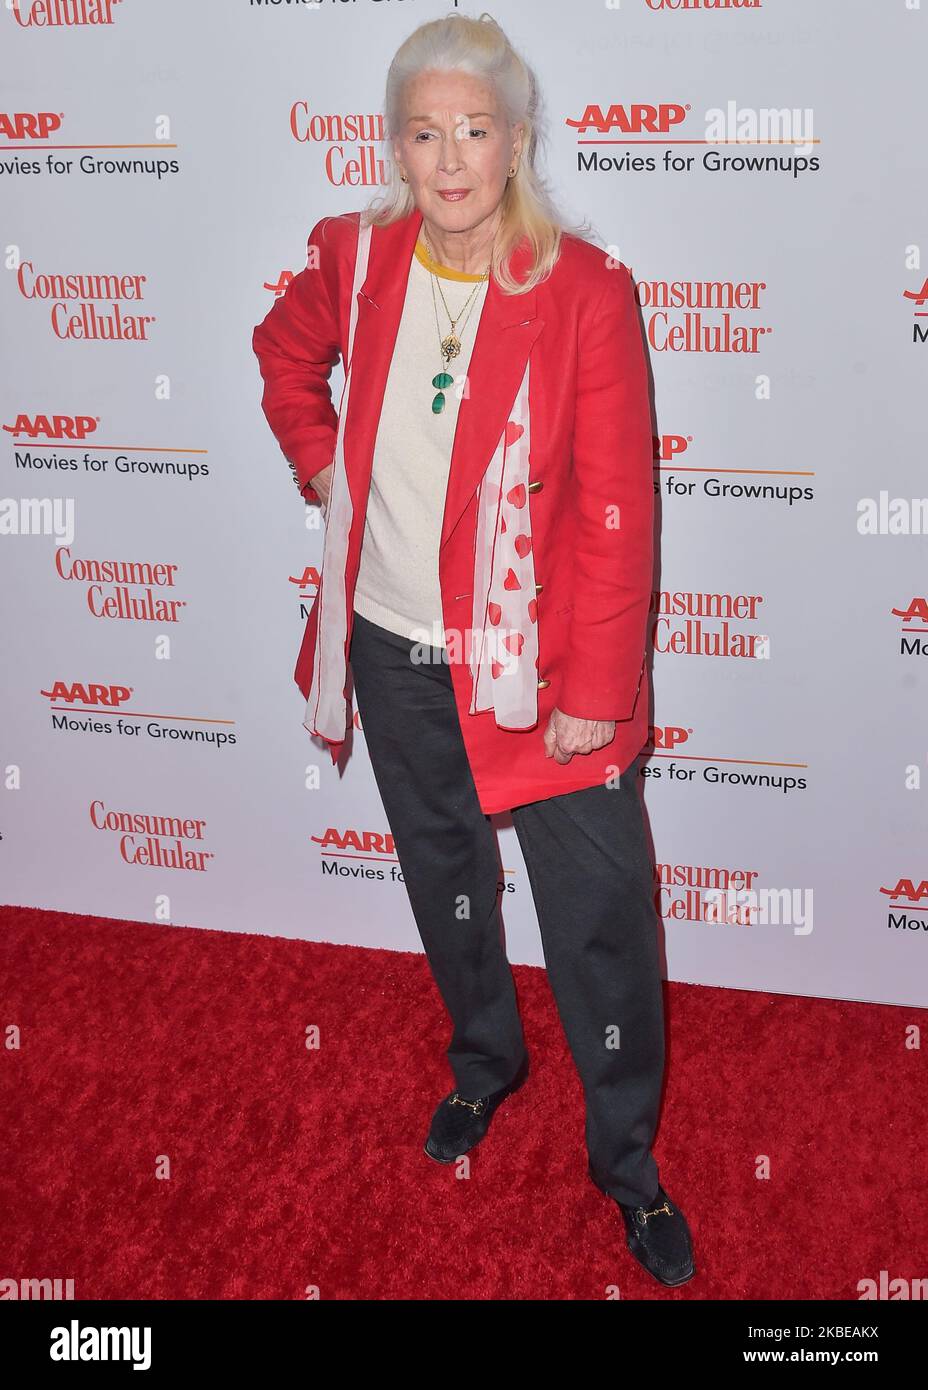 BEVERLY HILLS, LOS ANGELES, CALIFORNIA, USA - JANUARY 11: Diane Ladd arrives at AARP The Magazine's 19th Annual Movies For Grownups Awards held at The Beverly Wilshire Four Seasons Hotel on January 11, 2020 in Beverly Hills, Los Angeles, California, United States. (Photo by Image Press Agency/NurPhoto) Stock Photo